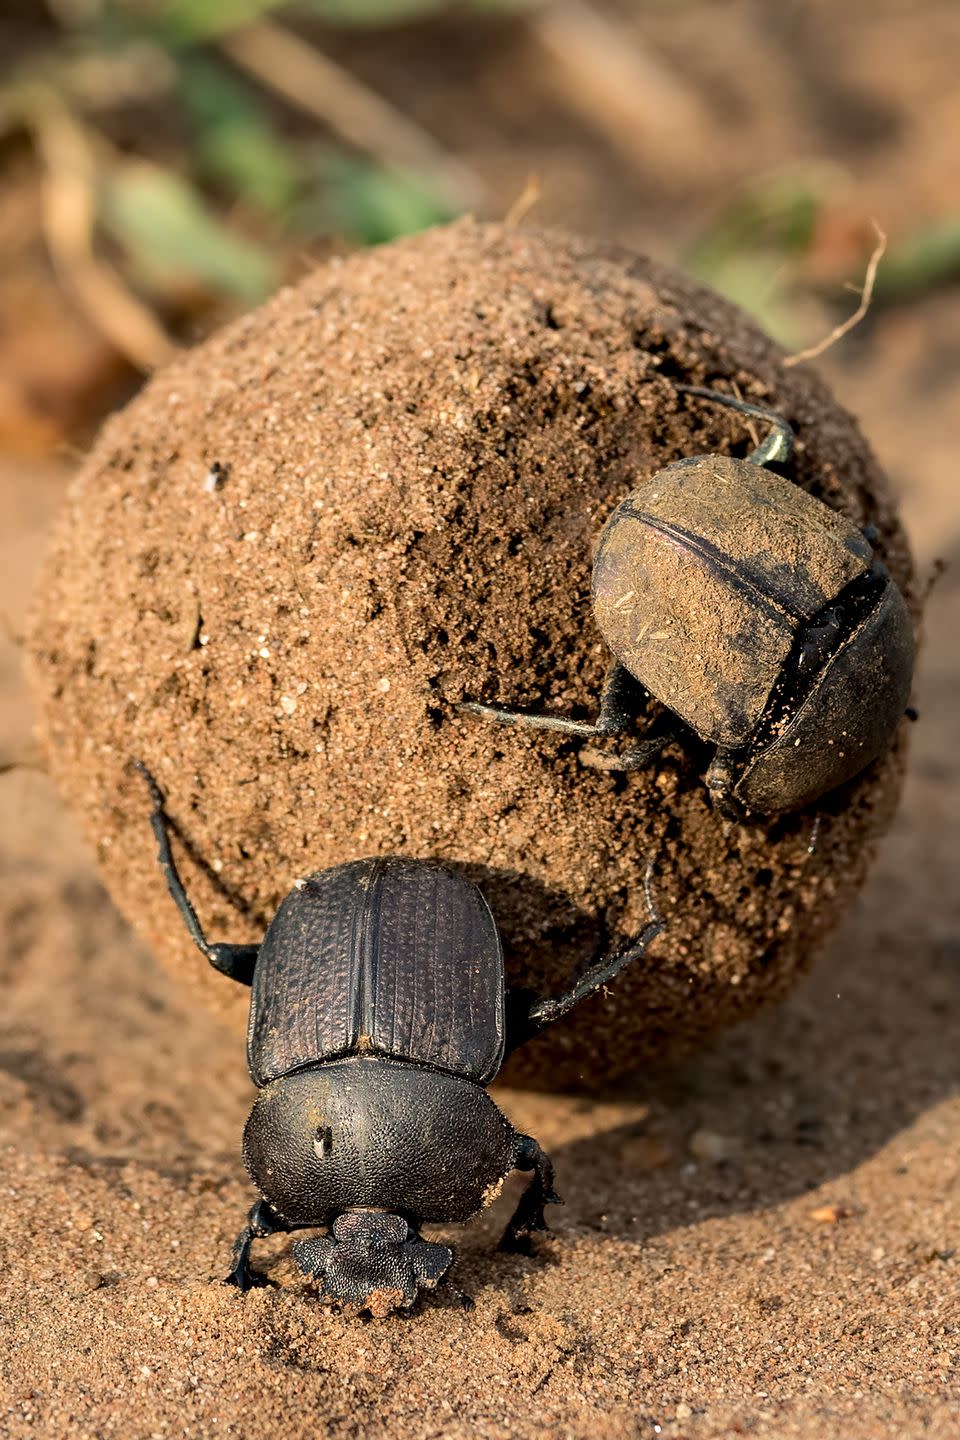 11. Dung beetles are crazy strong.